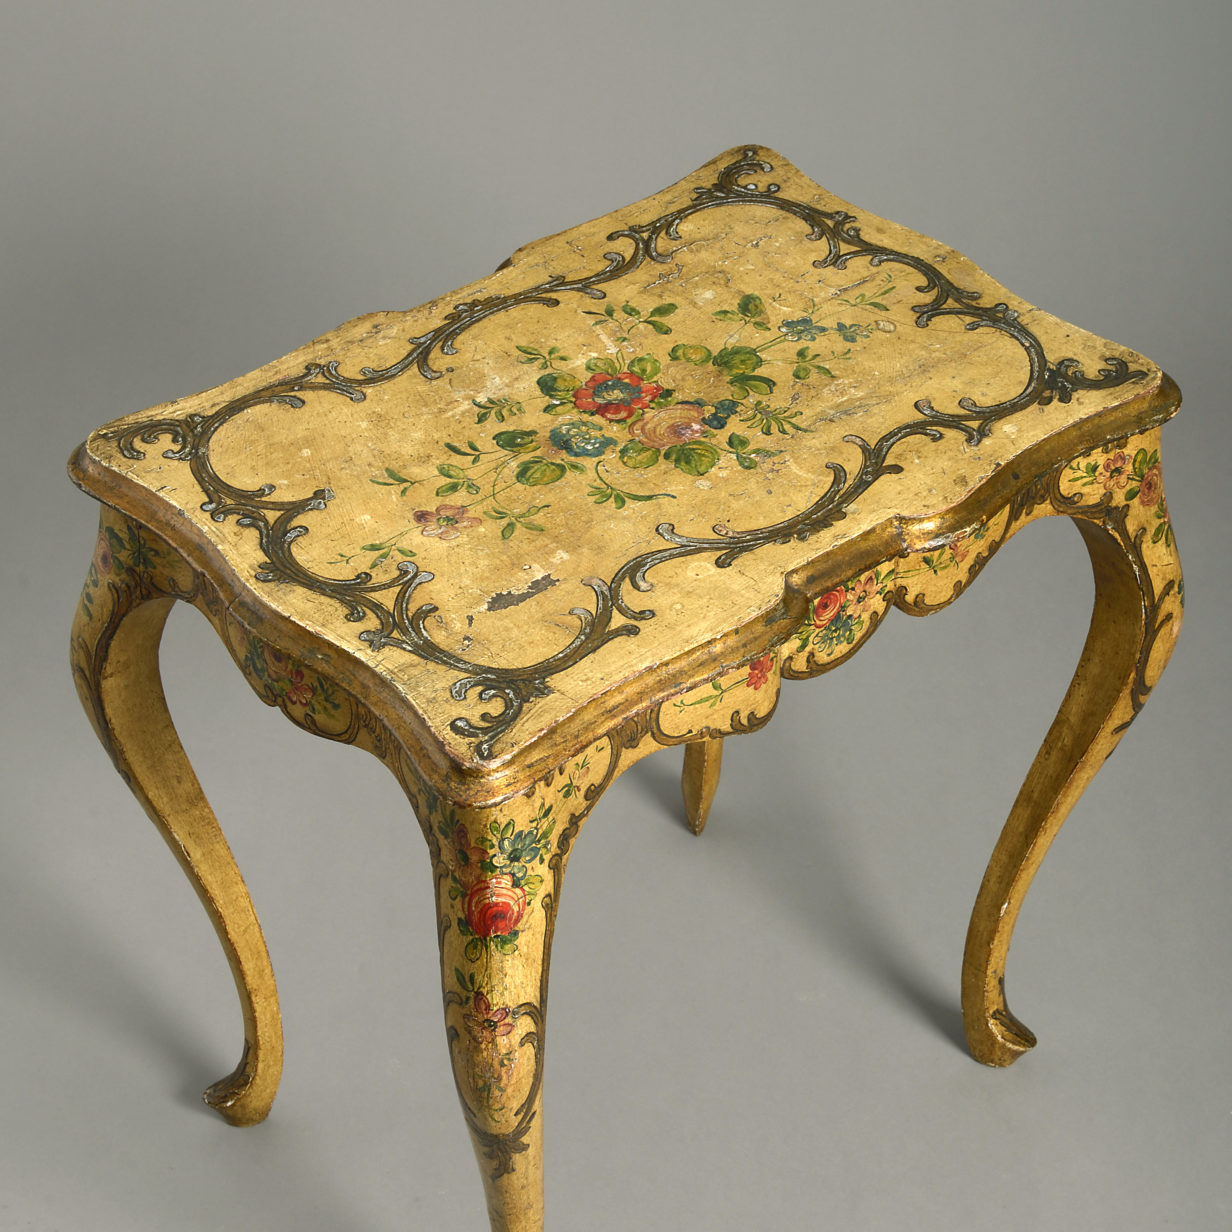 An ochre and polychrome painted rococo end table